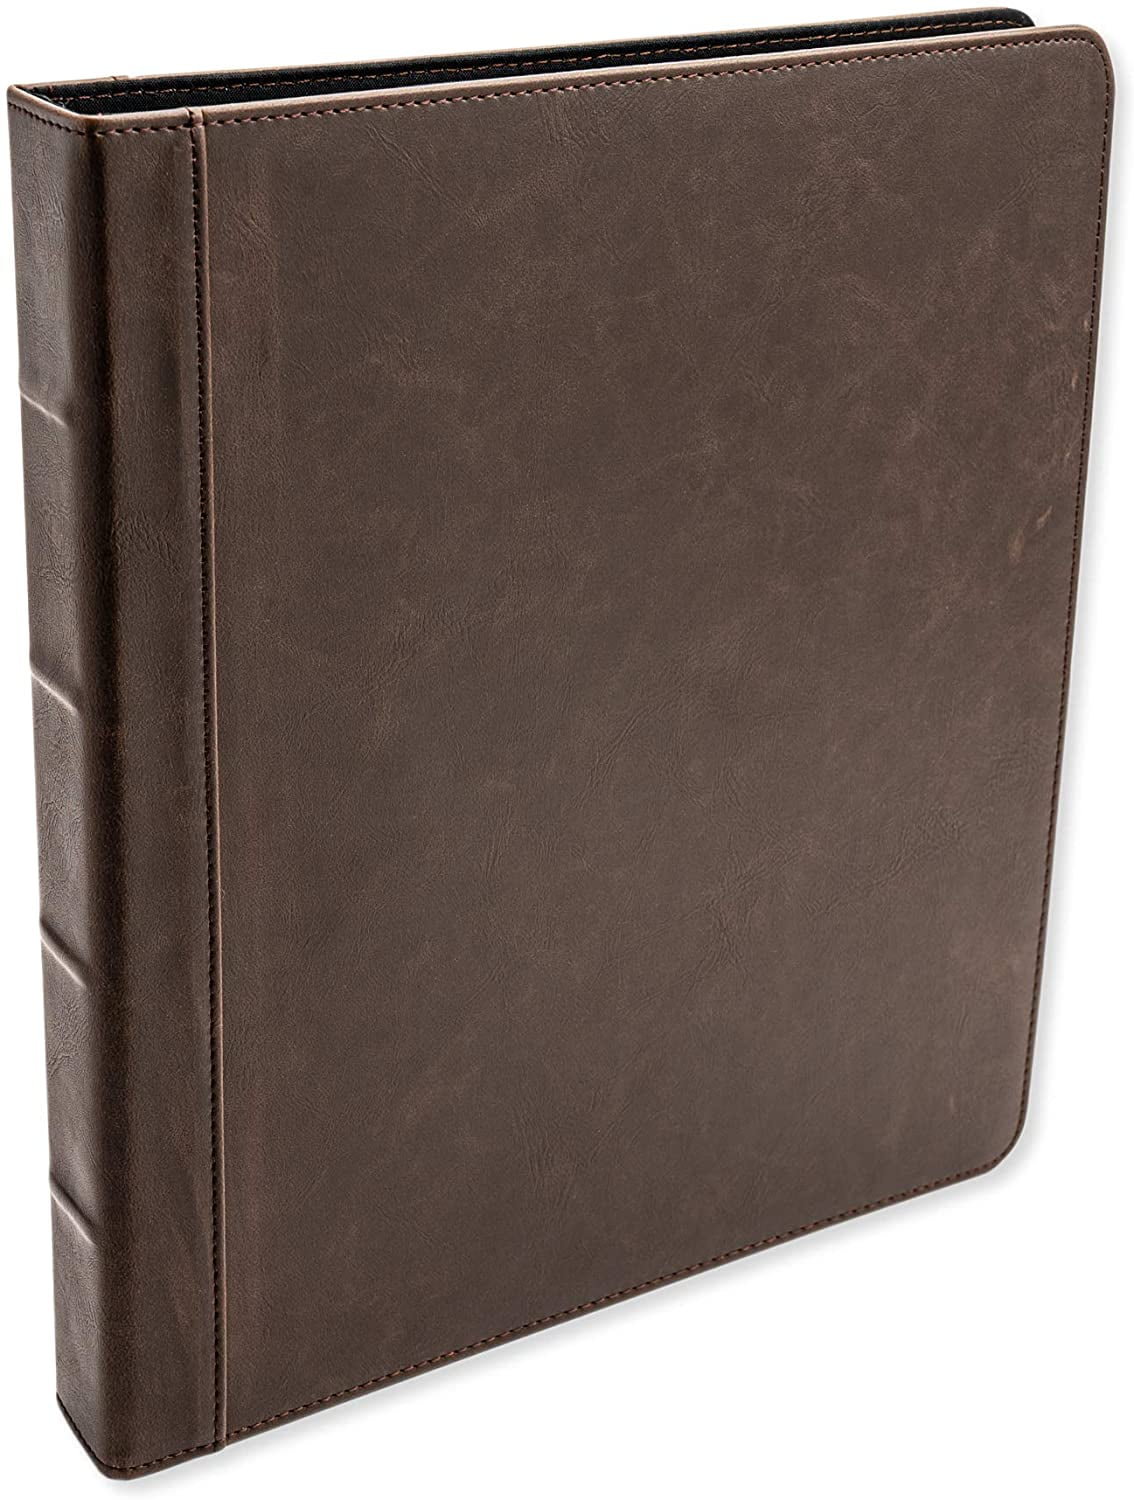 Leather business portfolio 3 ring binder/letter size 3 hole 8.5 x11 refill paper 